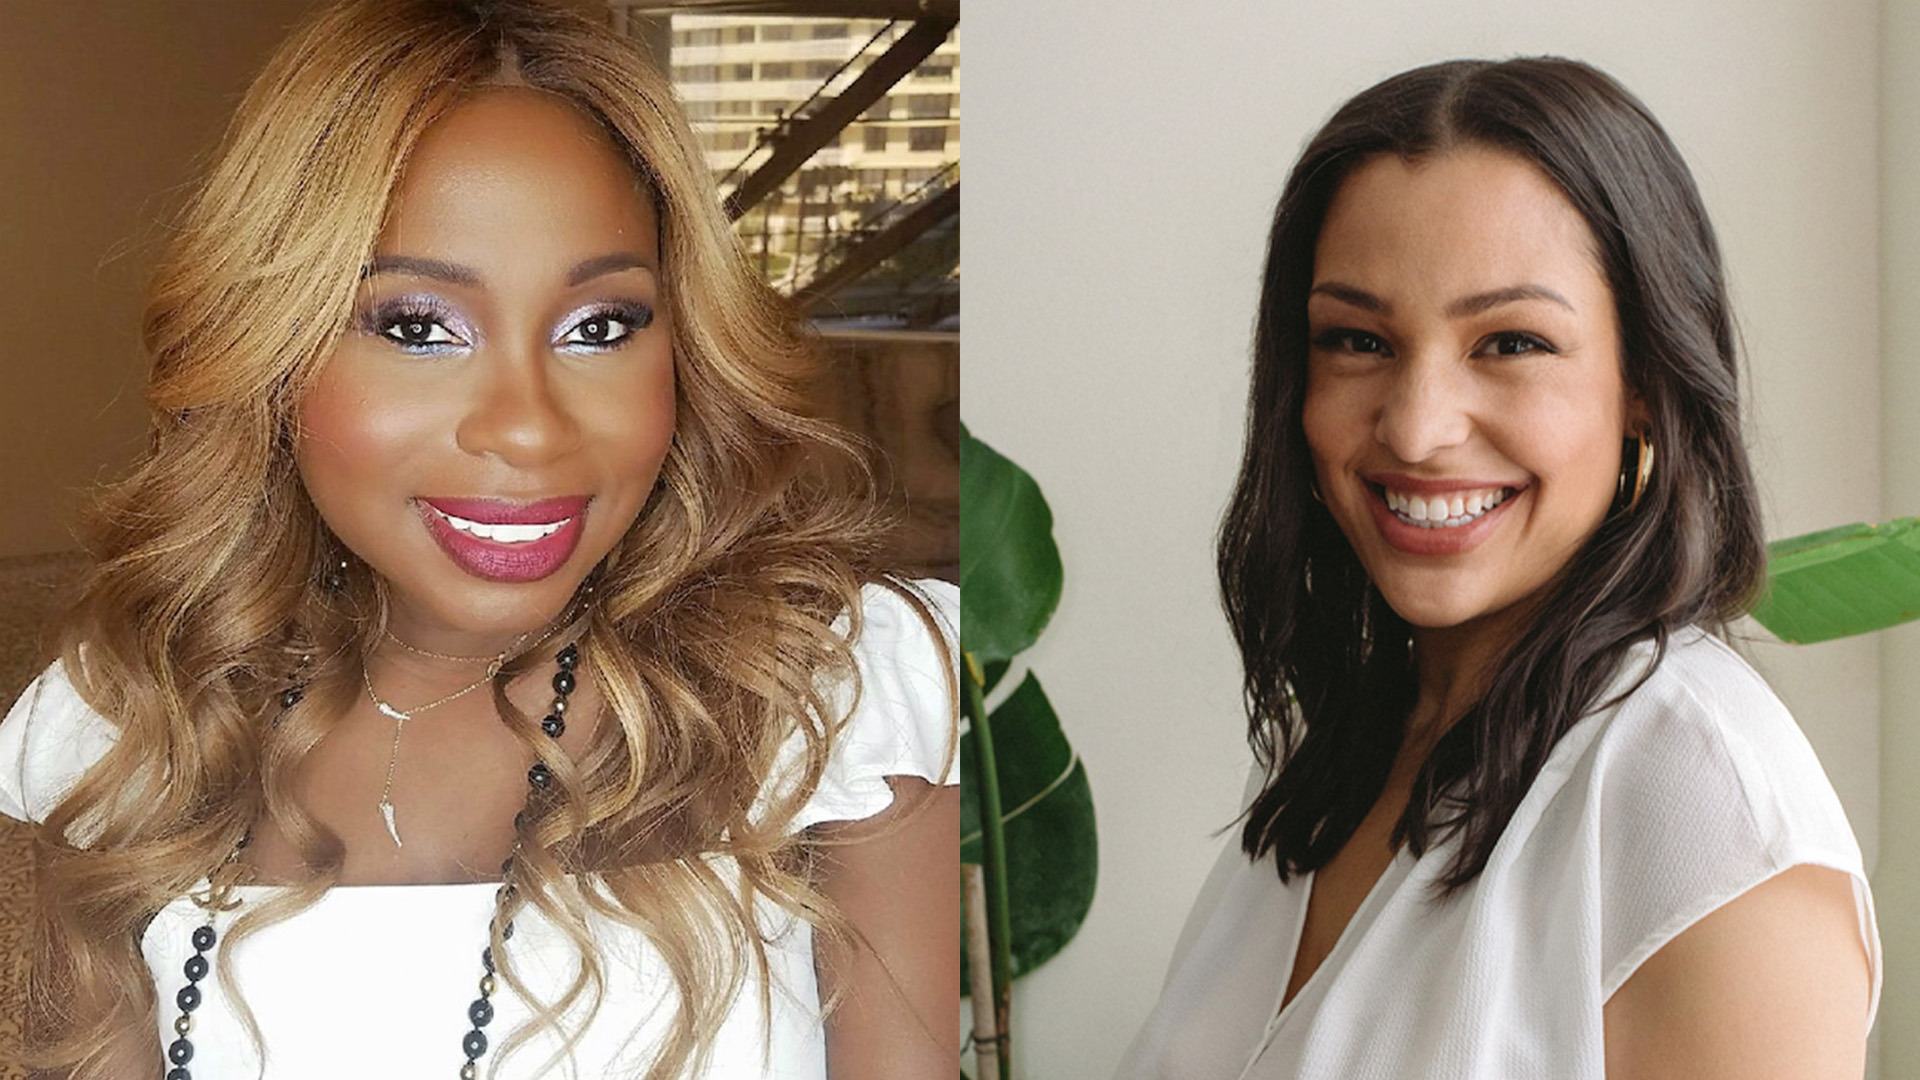 Meet The Two Women And Two Ventures Tackling The Same Mission Of Building Black Wealth